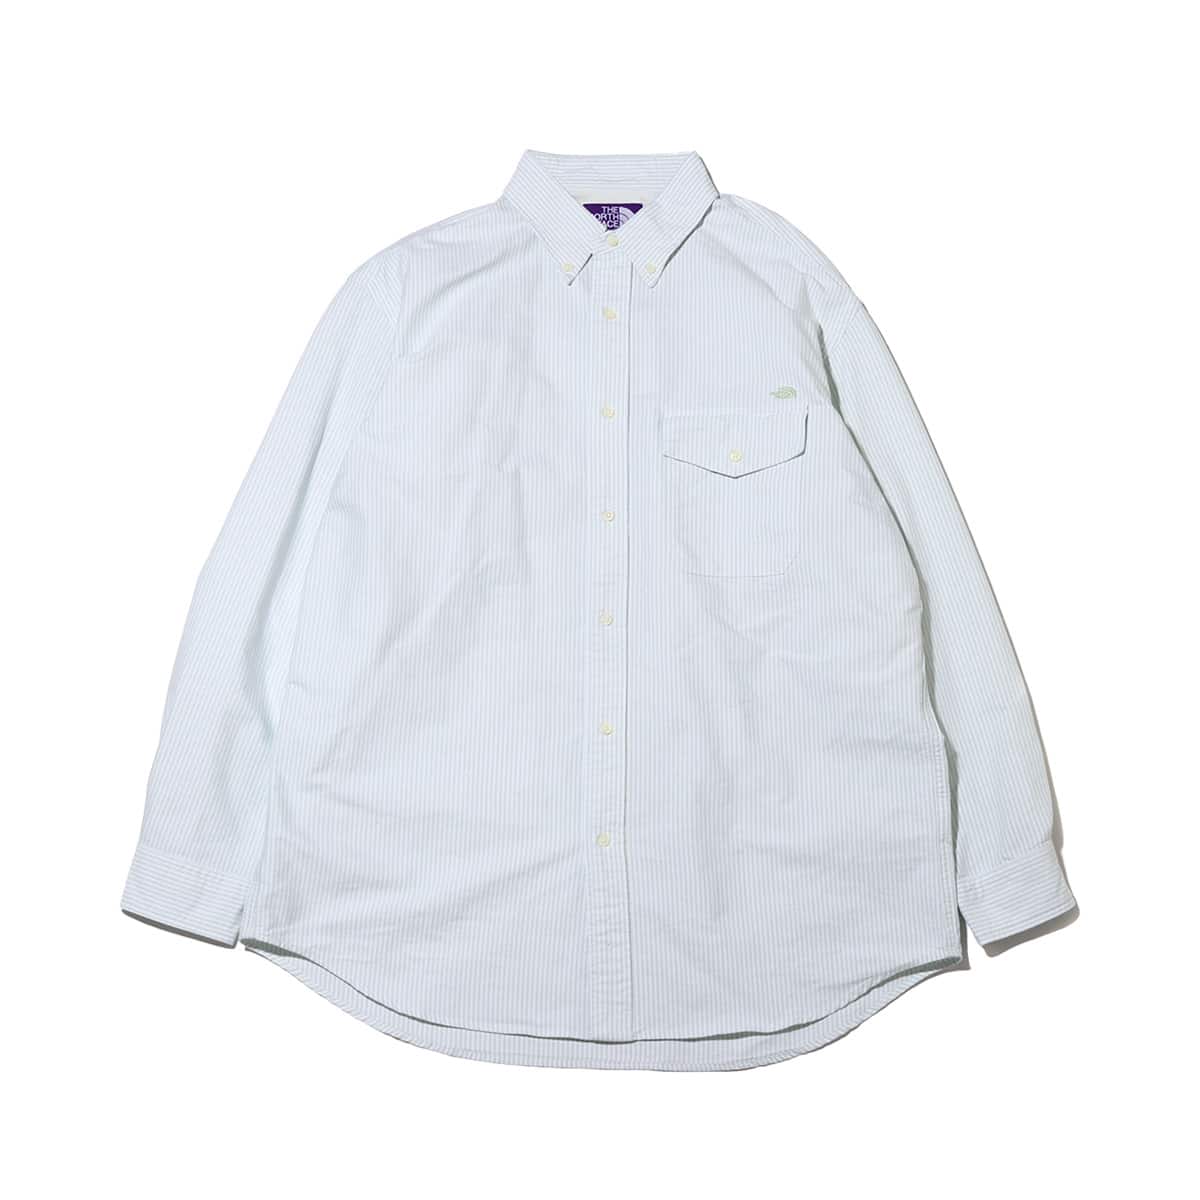 THE NORTH FACE PURPLE LABEL Cotton Polyester Stripe OX B.D. Shirt